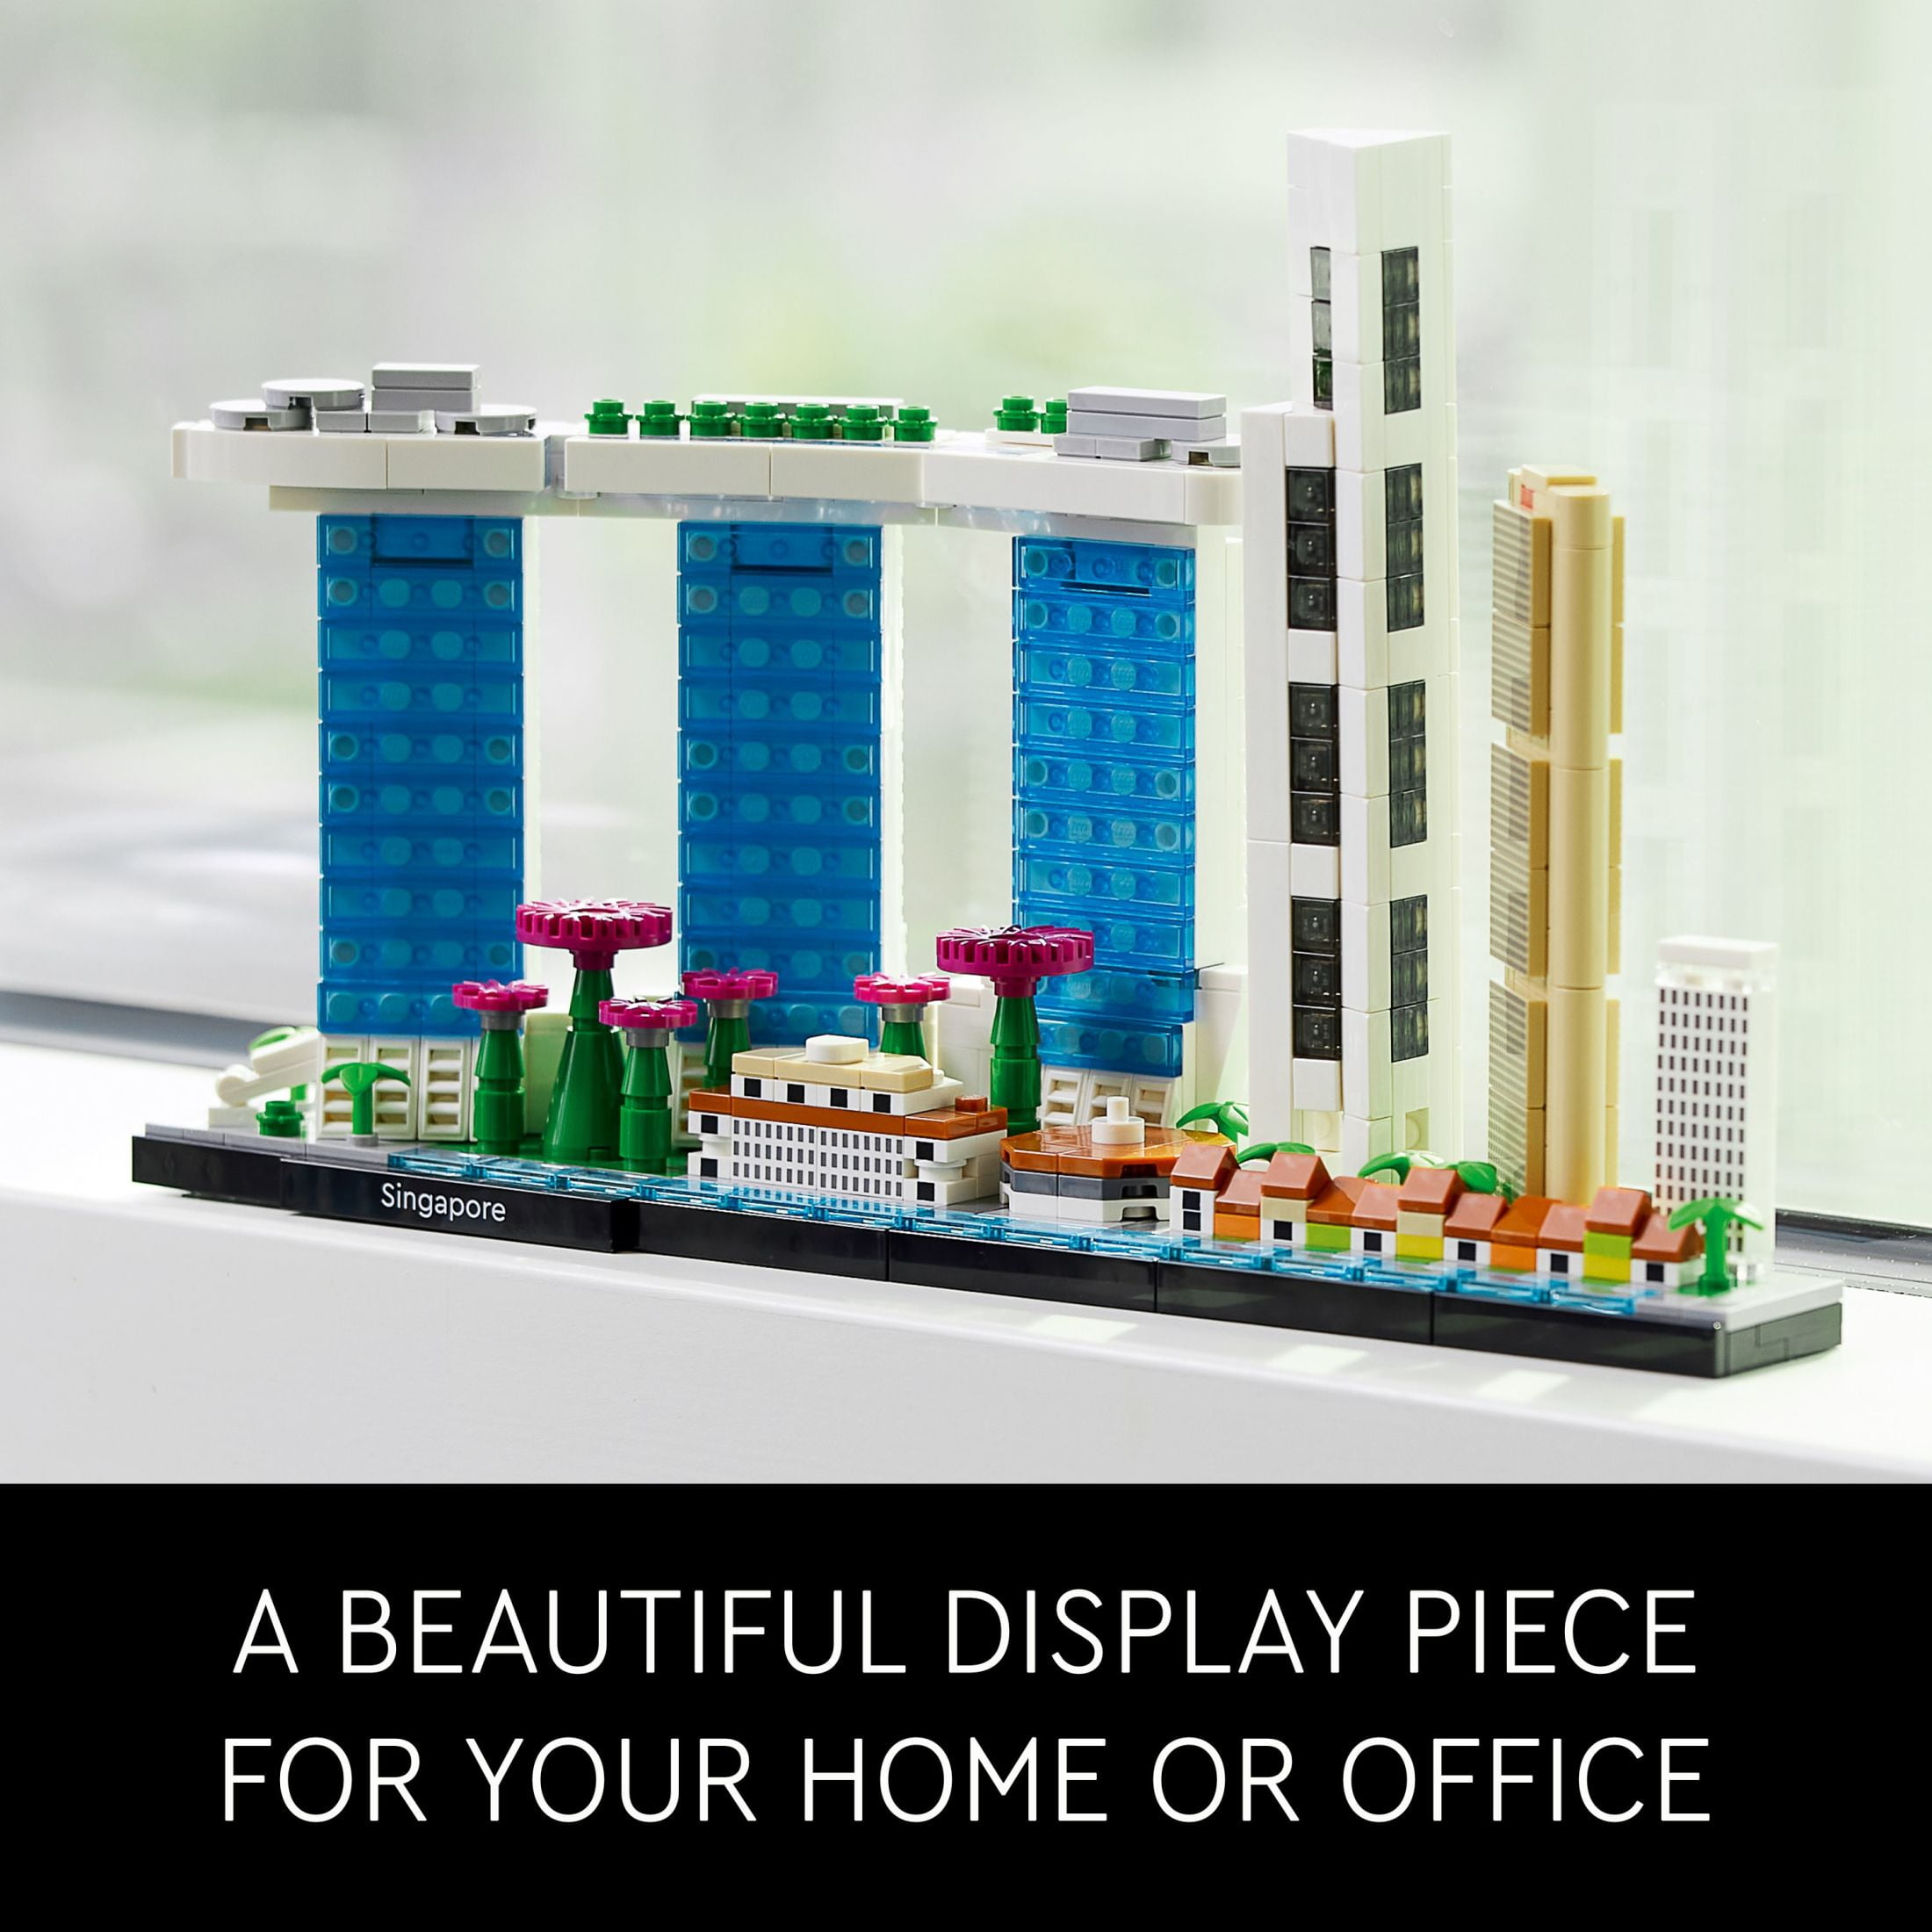 LEGO Architecture Singapore 21057 Skyline Collection Model Building Set for  Adults, Collectible Display Set Great for Home Décor, Construction Craft